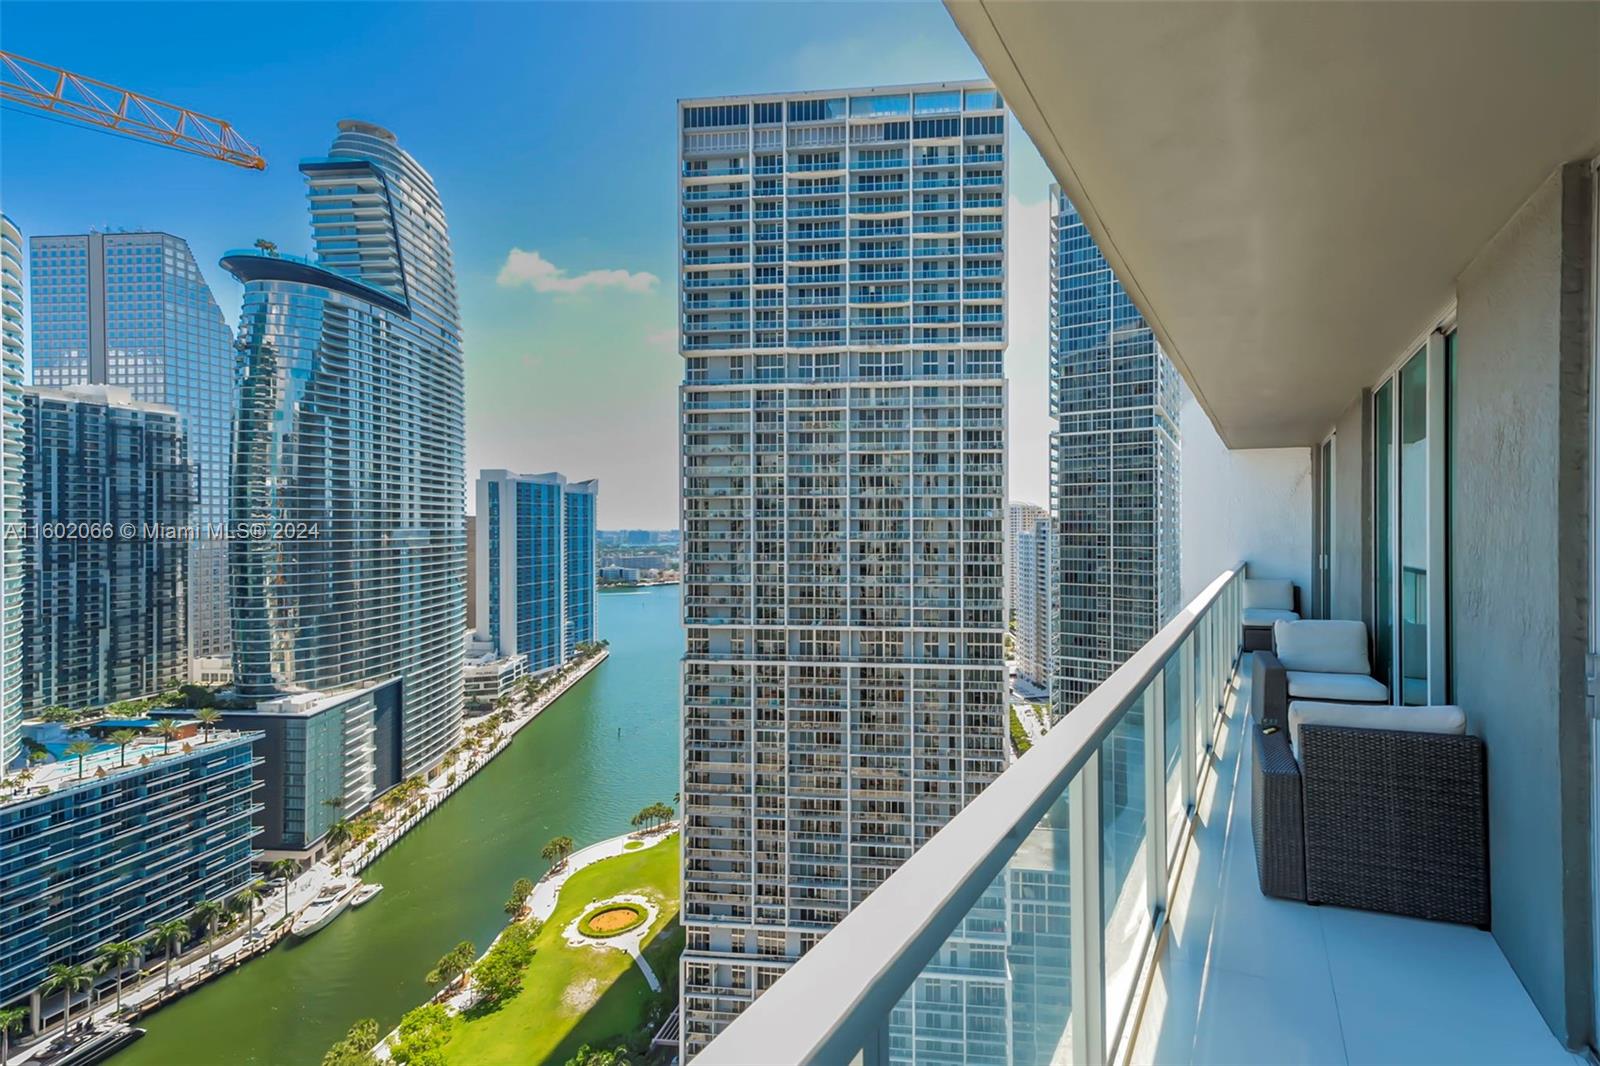 Rare 2 Bedroom "Split Floor Plan" Luxury Apartment on a high-floor, overlooking the Miami River and Biscayne Bay, to the Atlantic Ocean.  Spacious, with just under 1,200 interior square feet, oversized balcony stretching the entire width of the apartment, modern kitchen, two large bedrooms, and large primary bathroom with double-vanity, shower and jacuzzi tub.  Best location in Brickell, that's just across from the Brickell City Center, and walking distance to the area's top restaurants like ZUMA, Komodo, Sexy Fish, and top rooftops like Sugar and Tea Room.  Directly across from the waterfront and the Metro Mover, and only Just 10-15 minutes from the beach and Miami International Airport.  Amenities include a 42nd floor Rooftop Pool with views to South Beach, gym, spa, theater, and more!